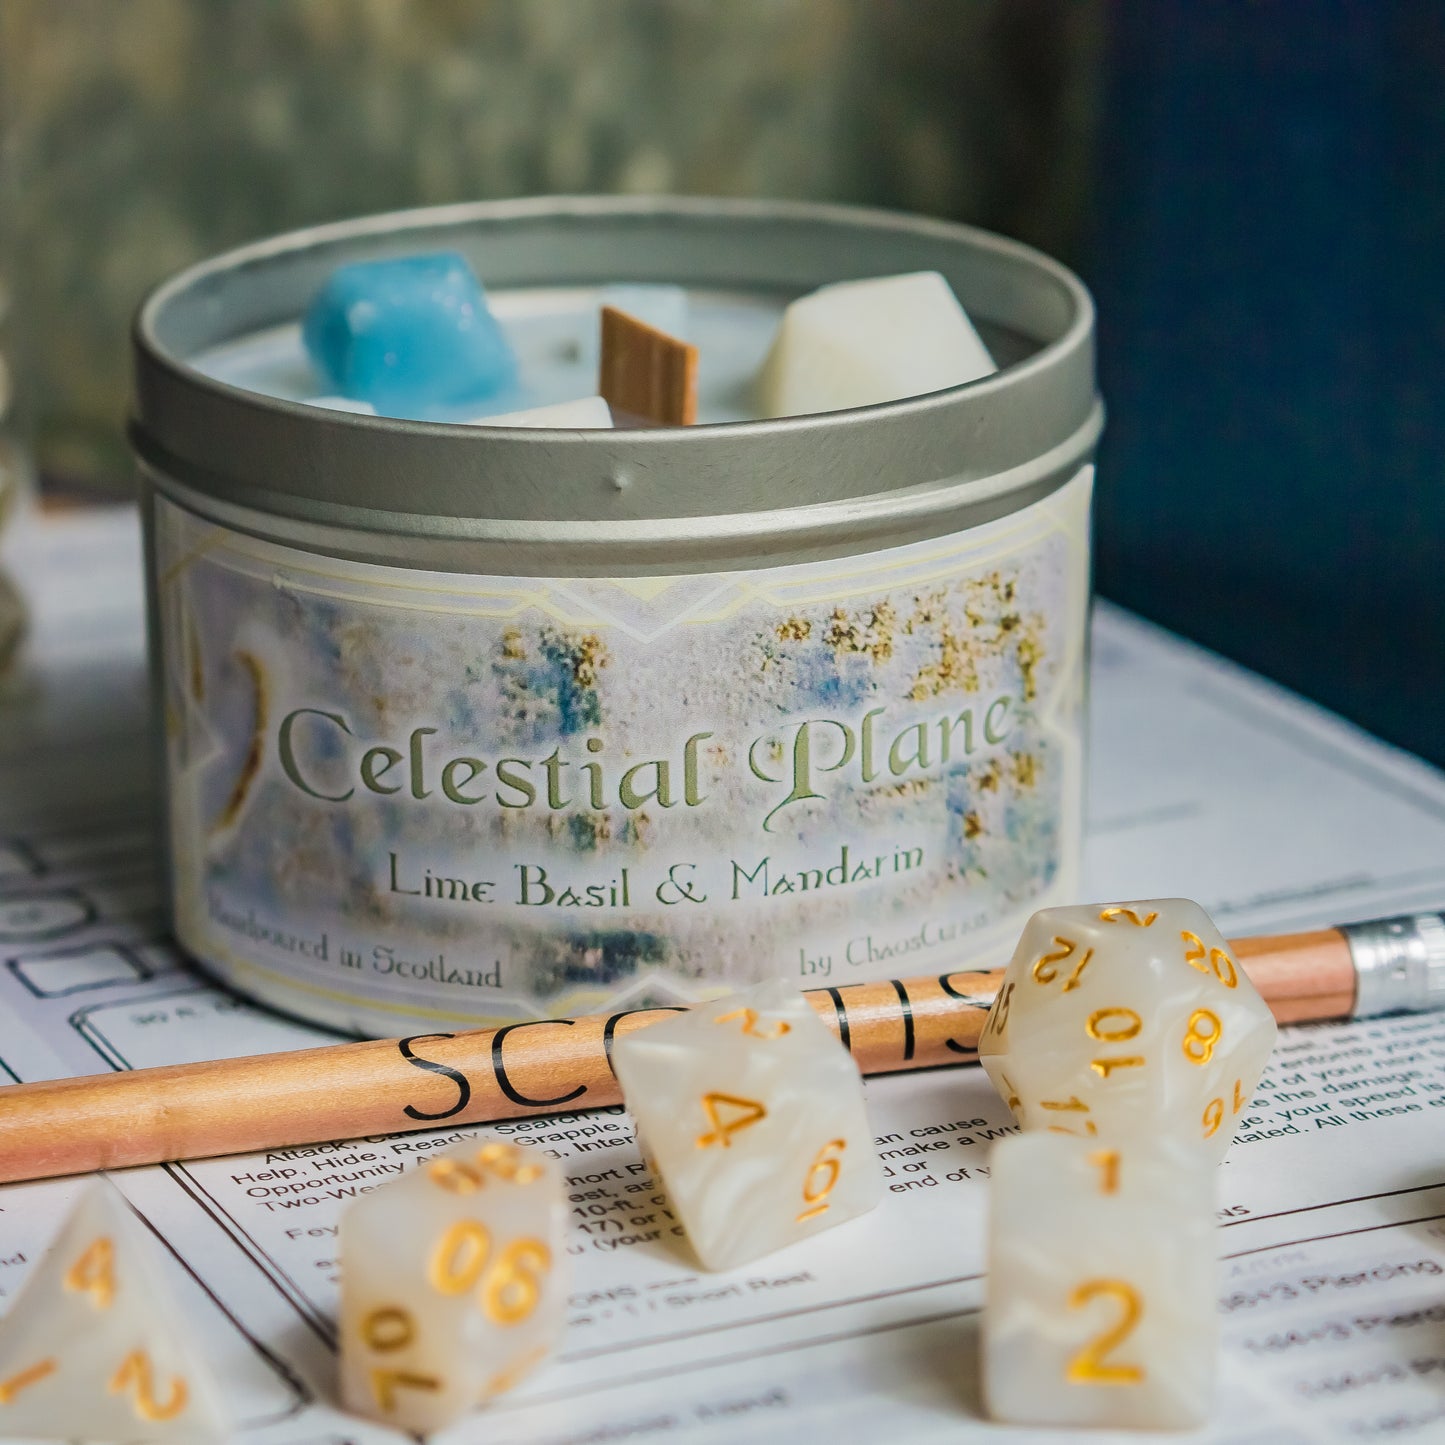 The Celestial Planes, DnD Dice Candle, Wood Wick Candle, Lime Basil and Mandarin Scent, Roleplay Candle, with Dice Wax Melts, 35+ Hours